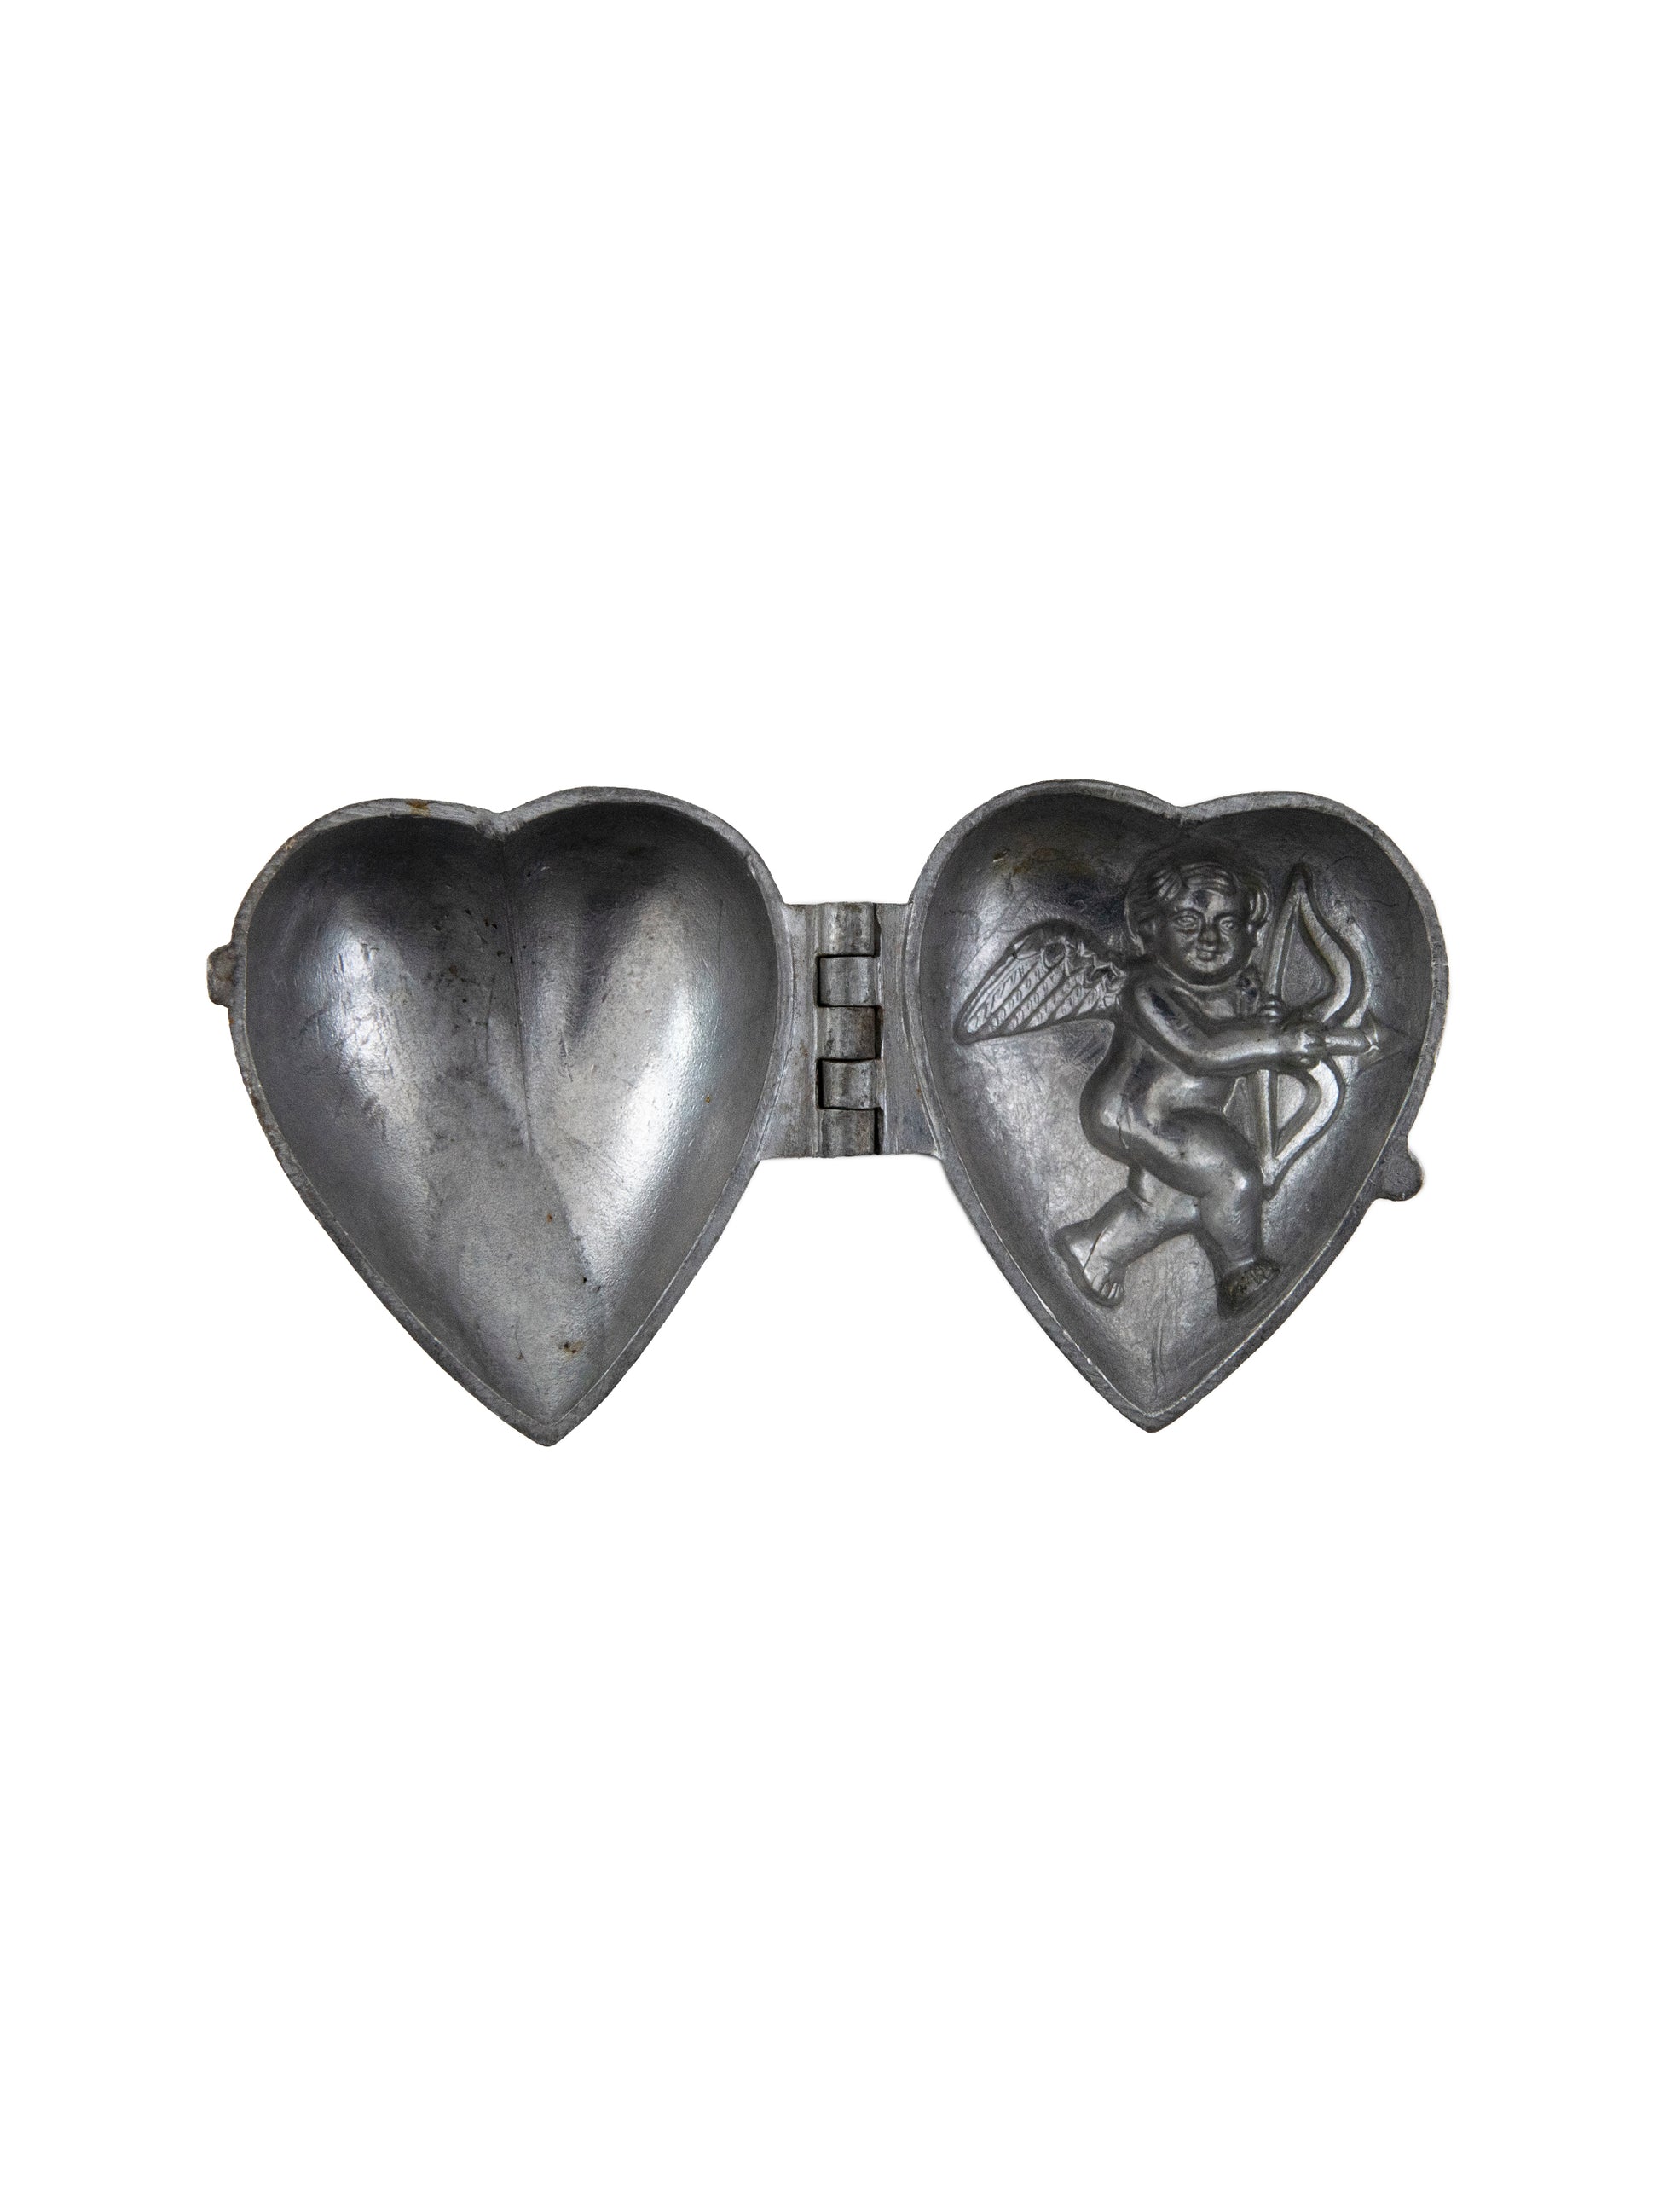 Vintage 1920s Pewter Heart with Cupid Ice Cream Mold Weston Table